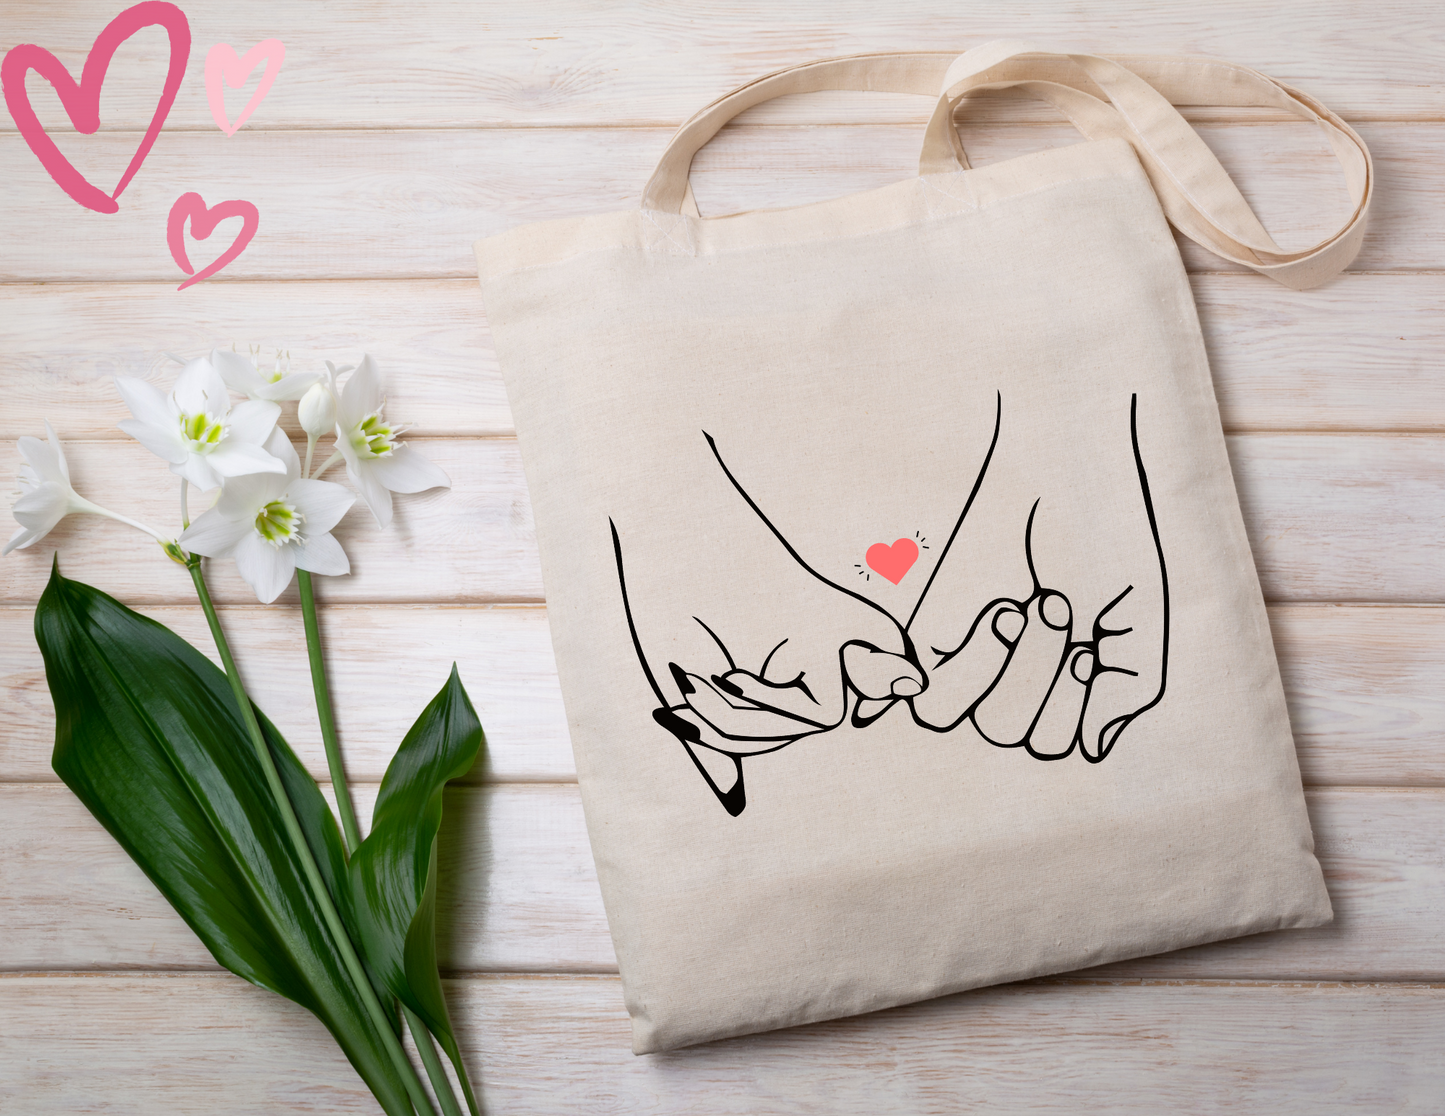 Holding Hands Tote Bag